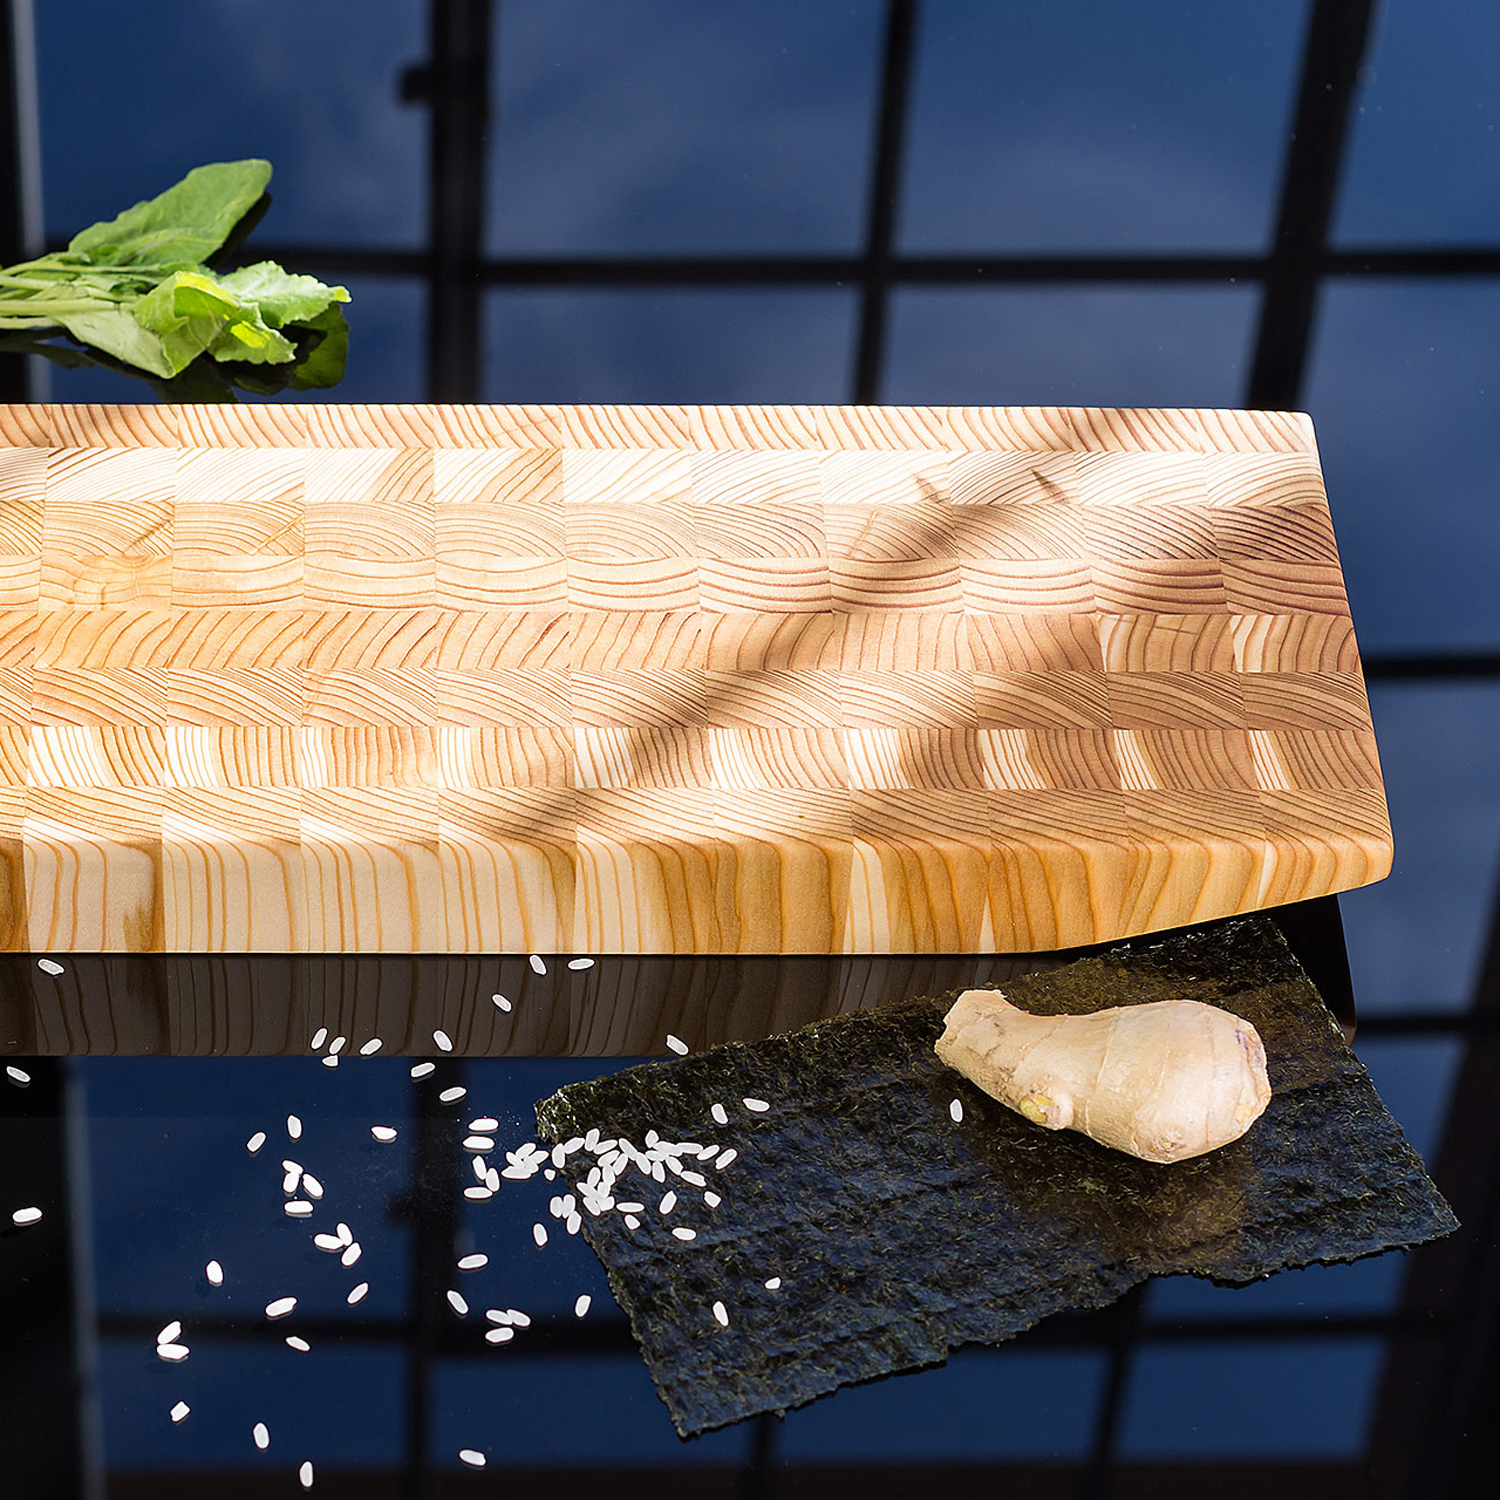 Larch Wood: Ki Small Serving Board Product Image 1 of 5